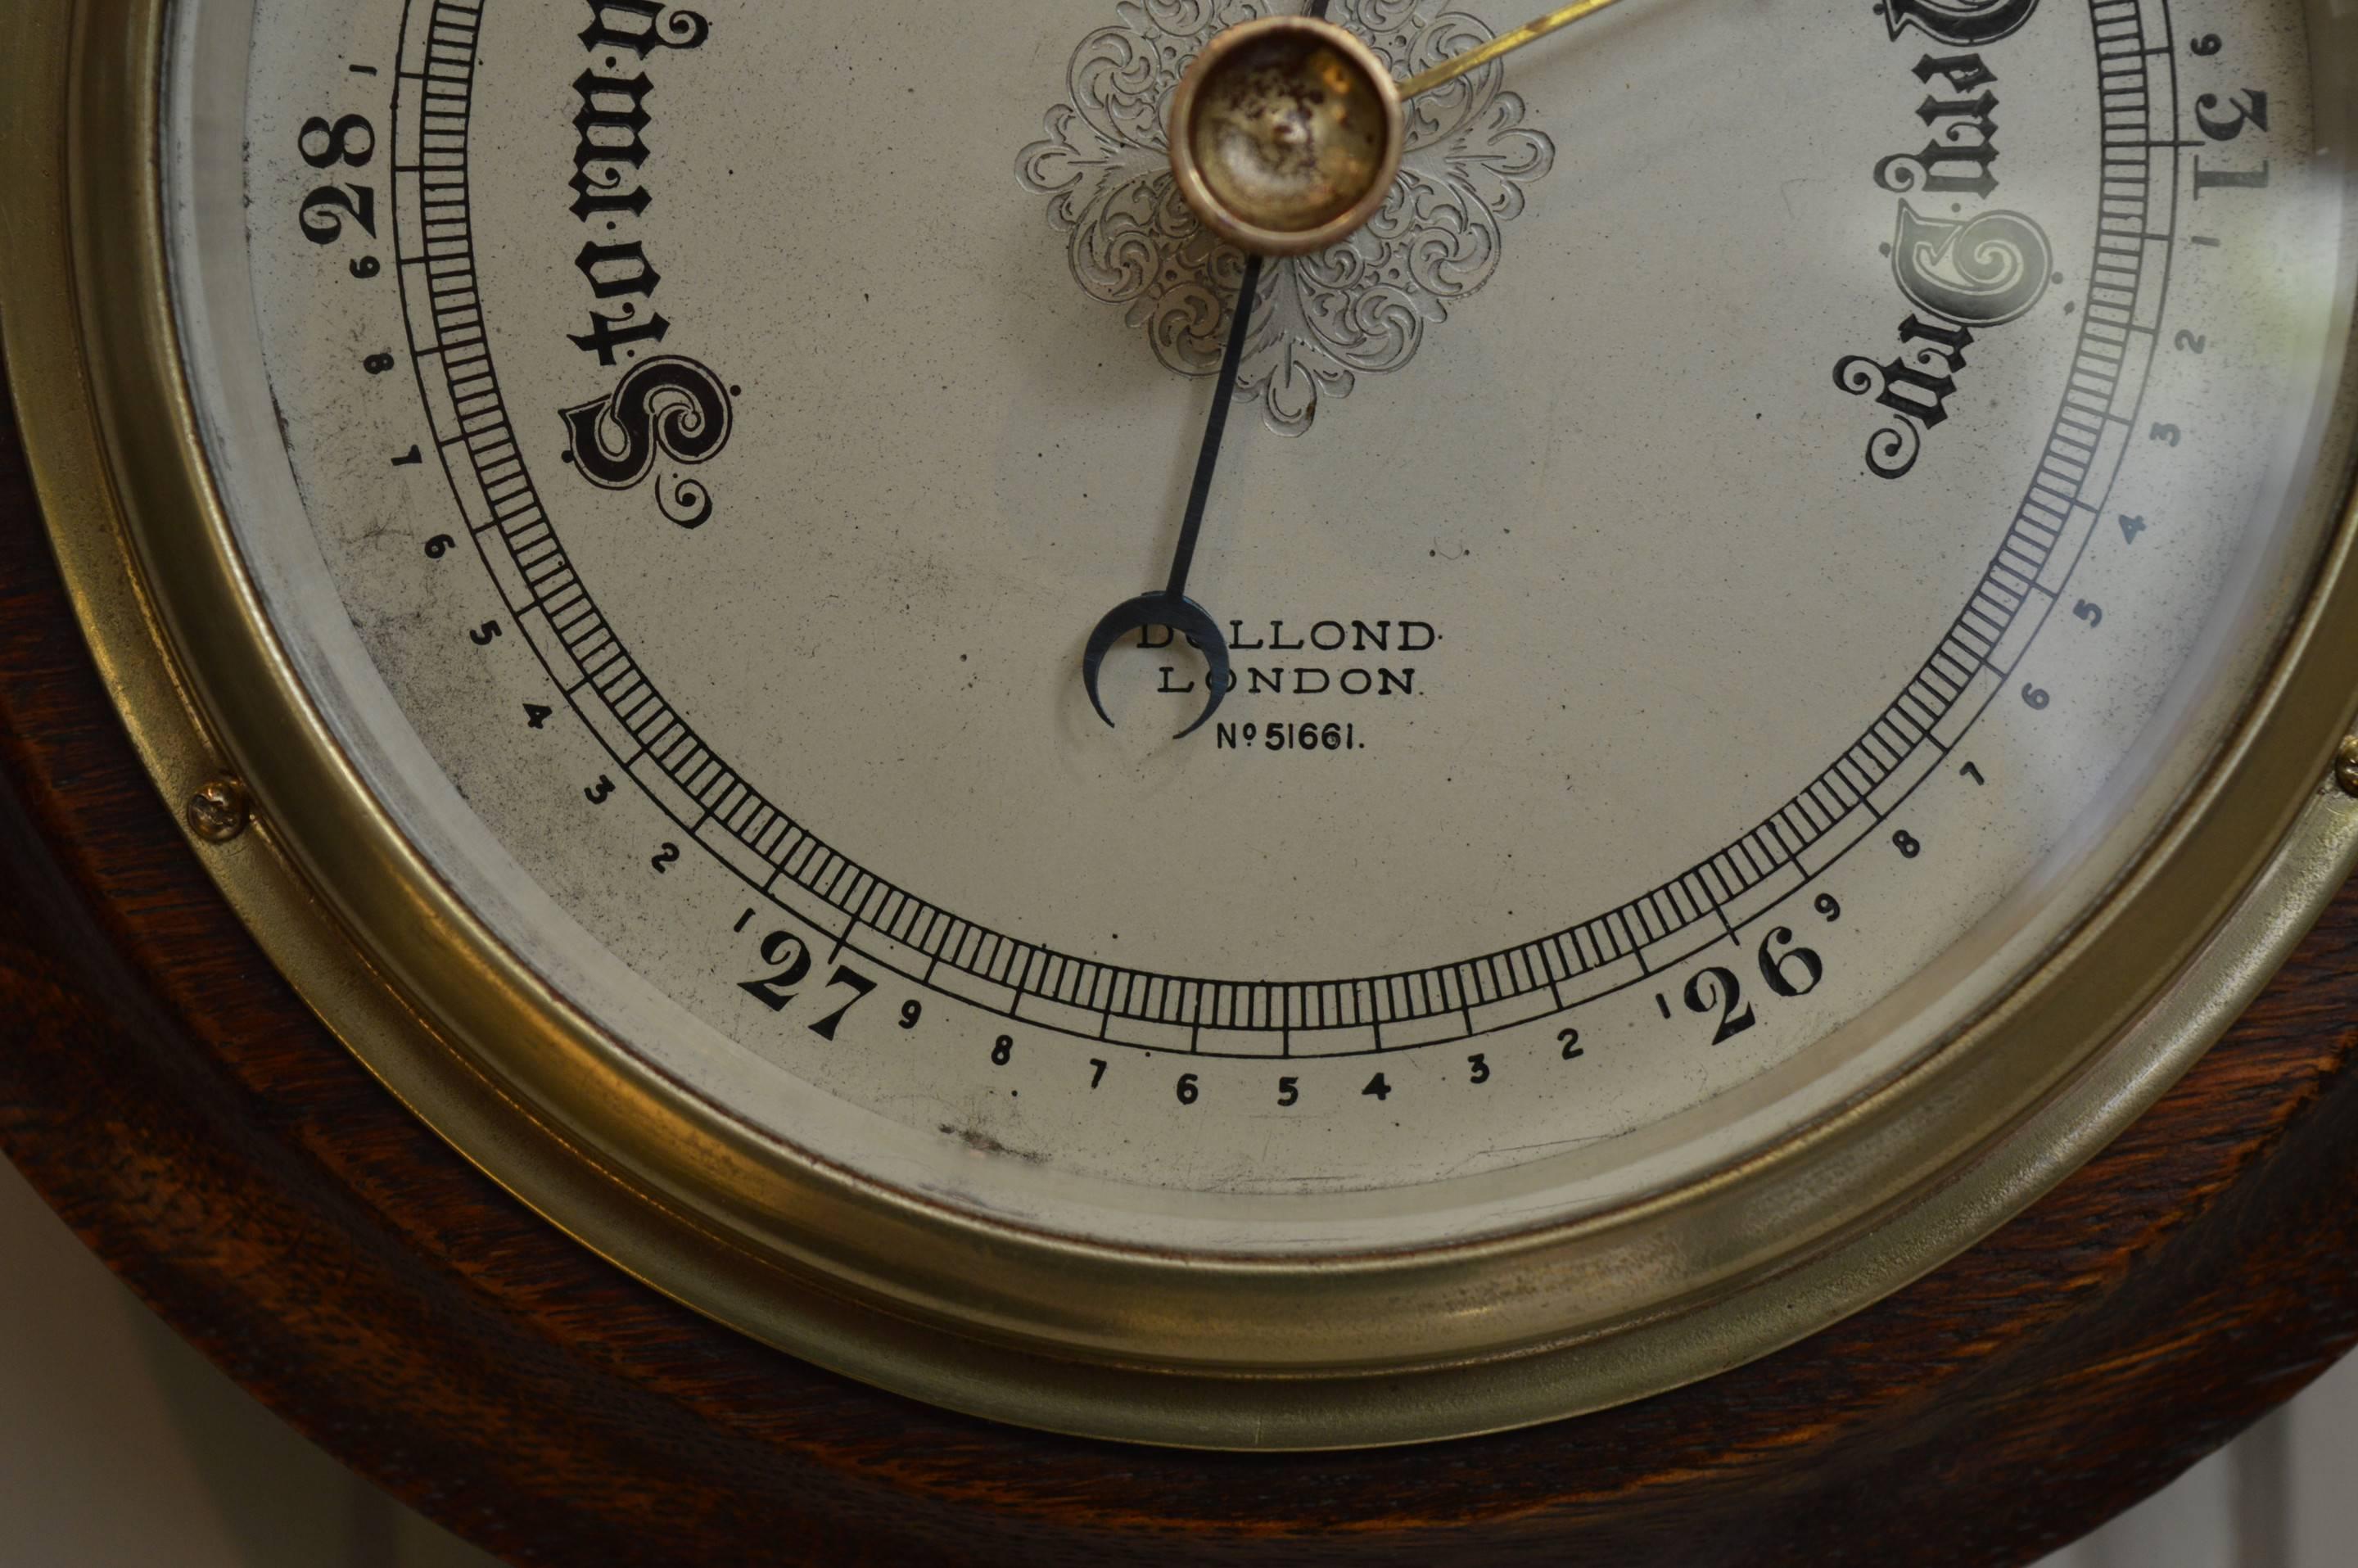 A solid oak case barometer made by Dolland of London and is numbered 51661. It has a stepped turned case, and an engraved, silvered dial. This can be transported easily as it does not contain mercury.